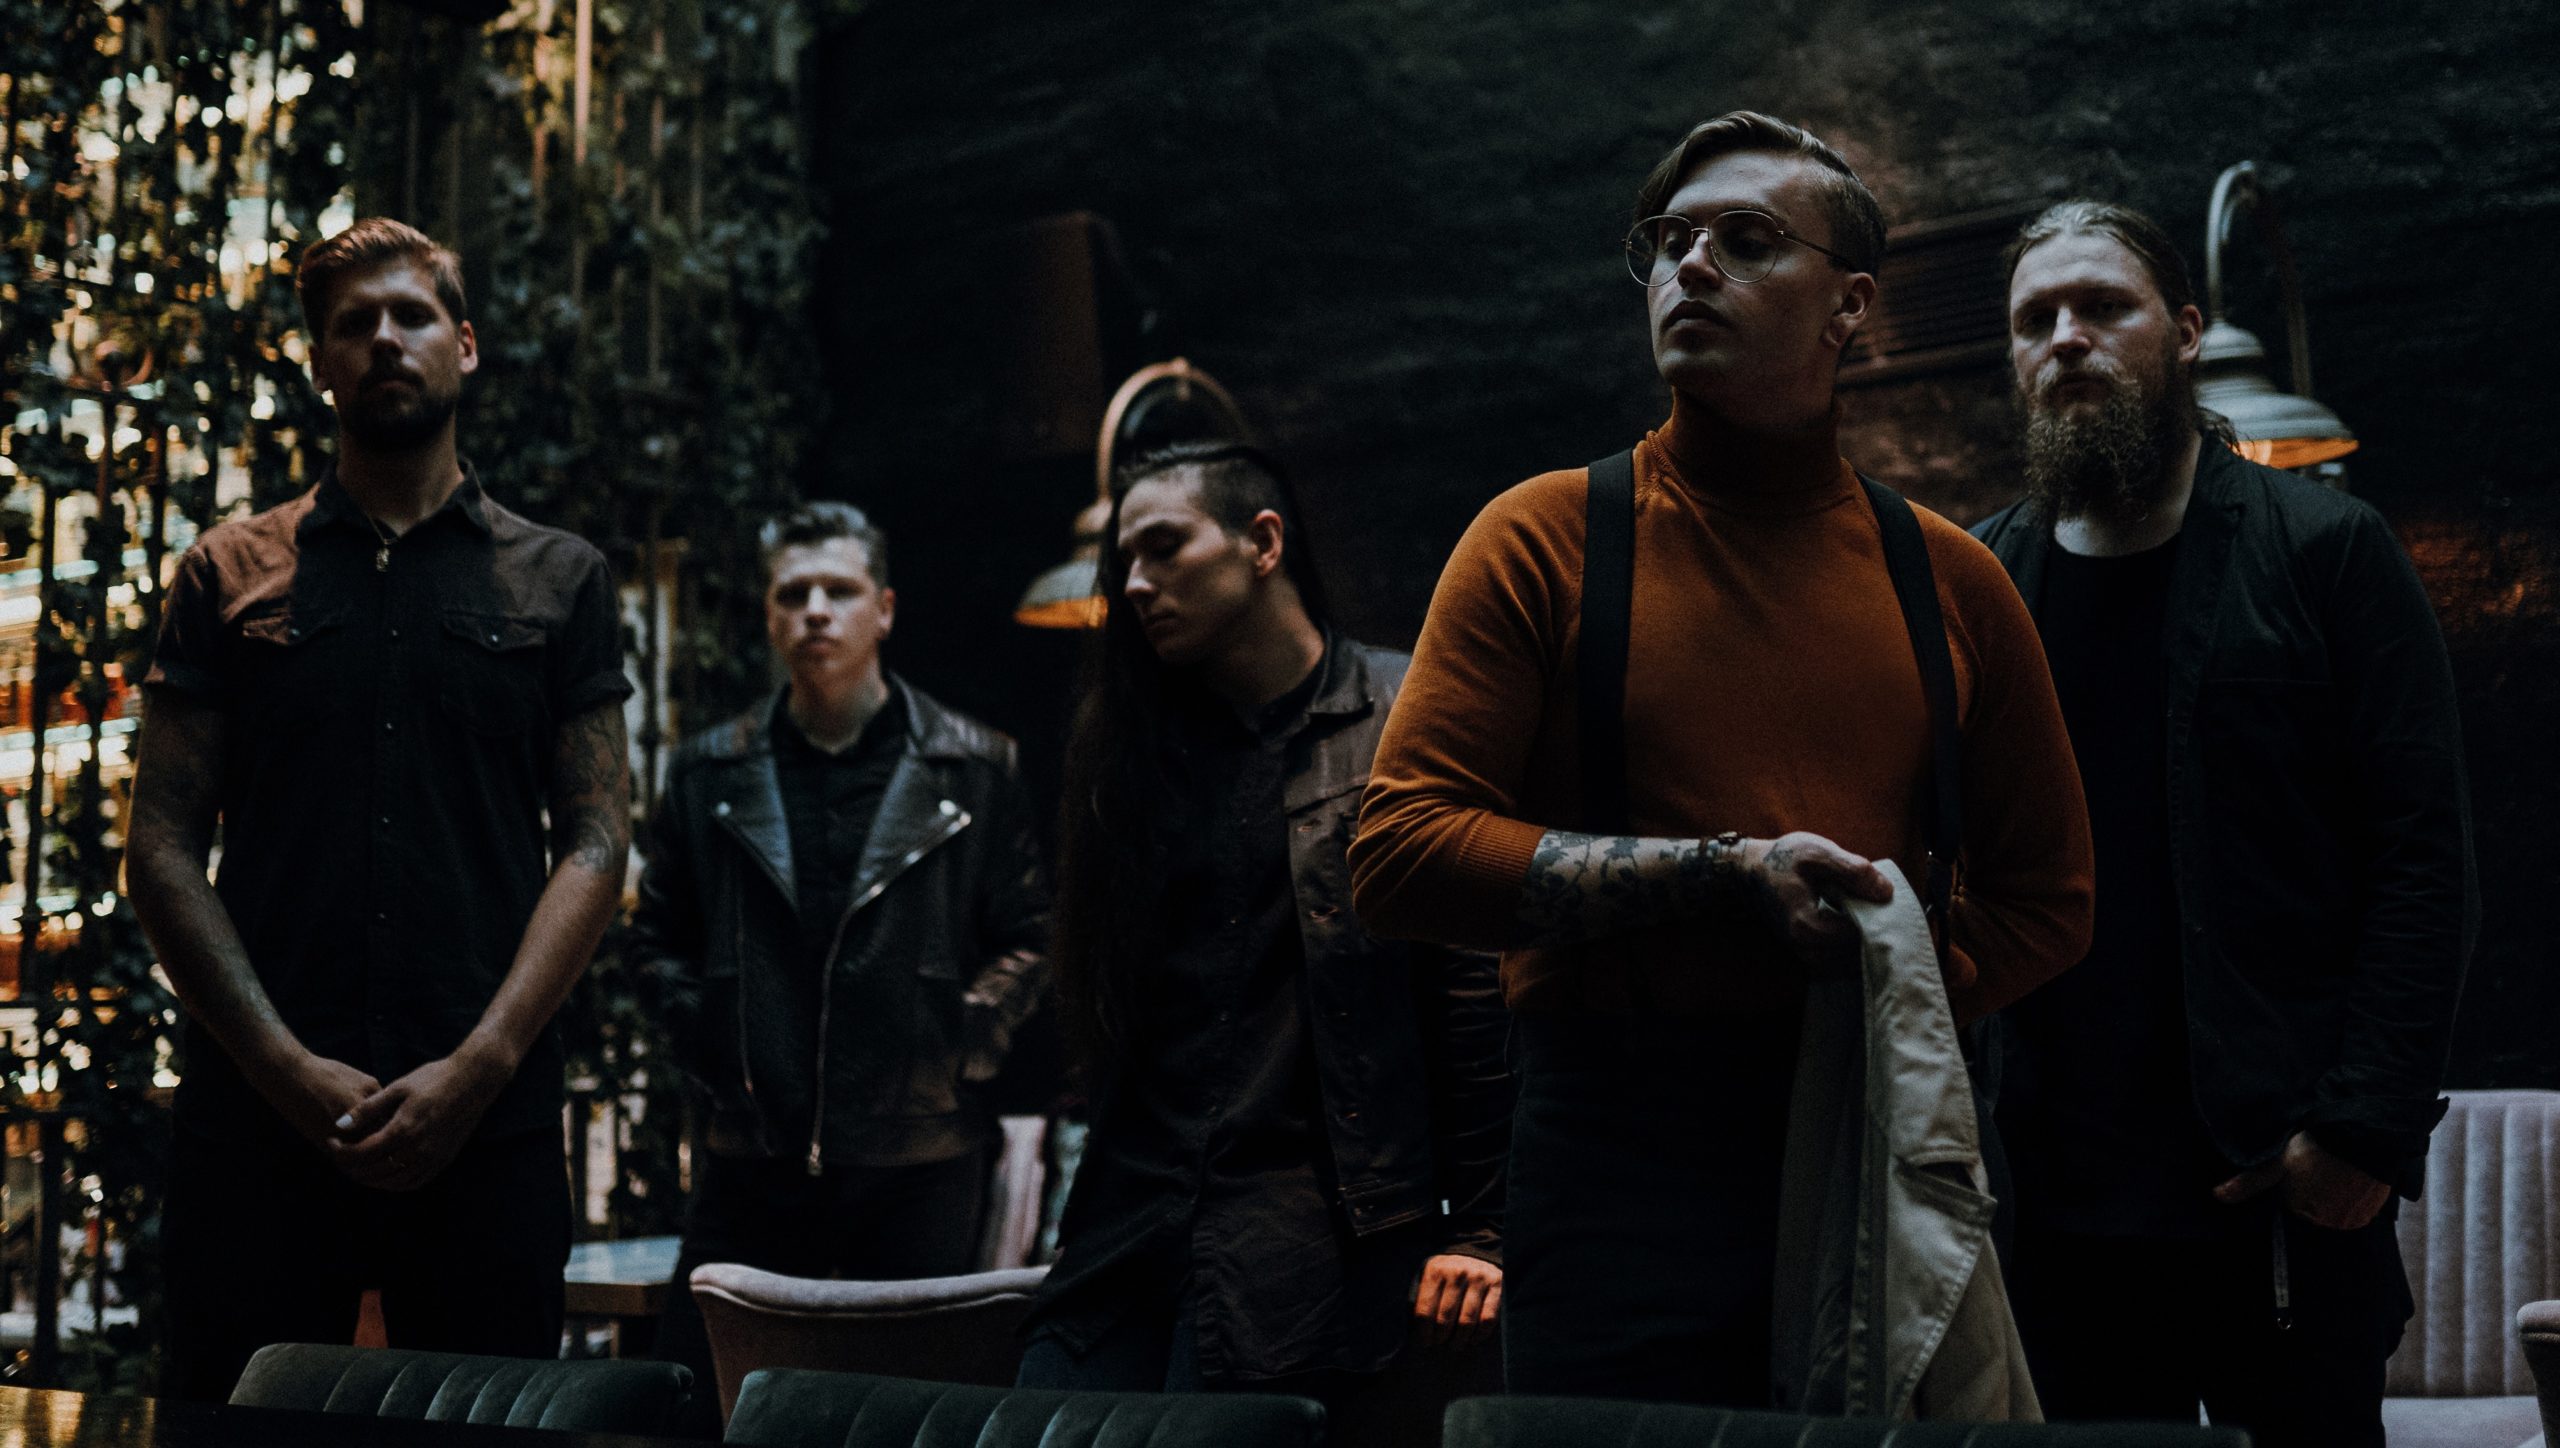 imminence promo 01 2019 credit Jakob Koc official press scaled